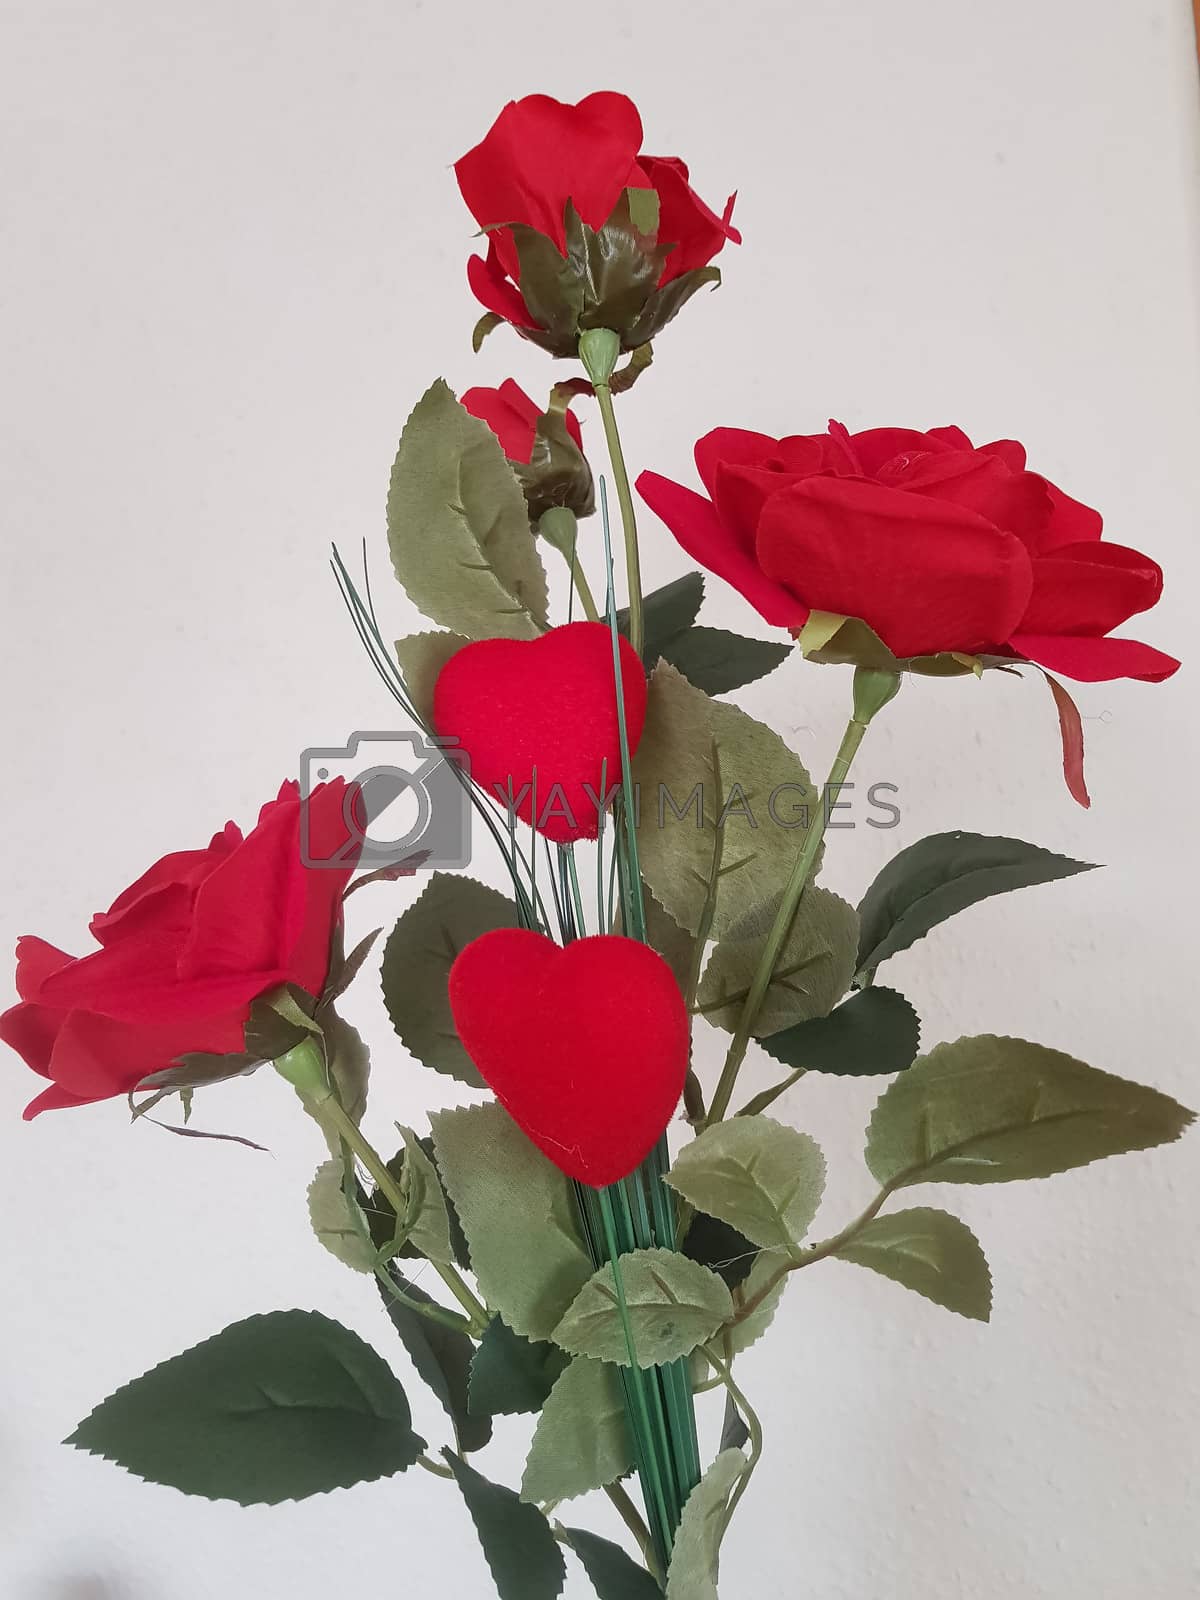 Royalty free image of Bouquet of red roses by JFsPic